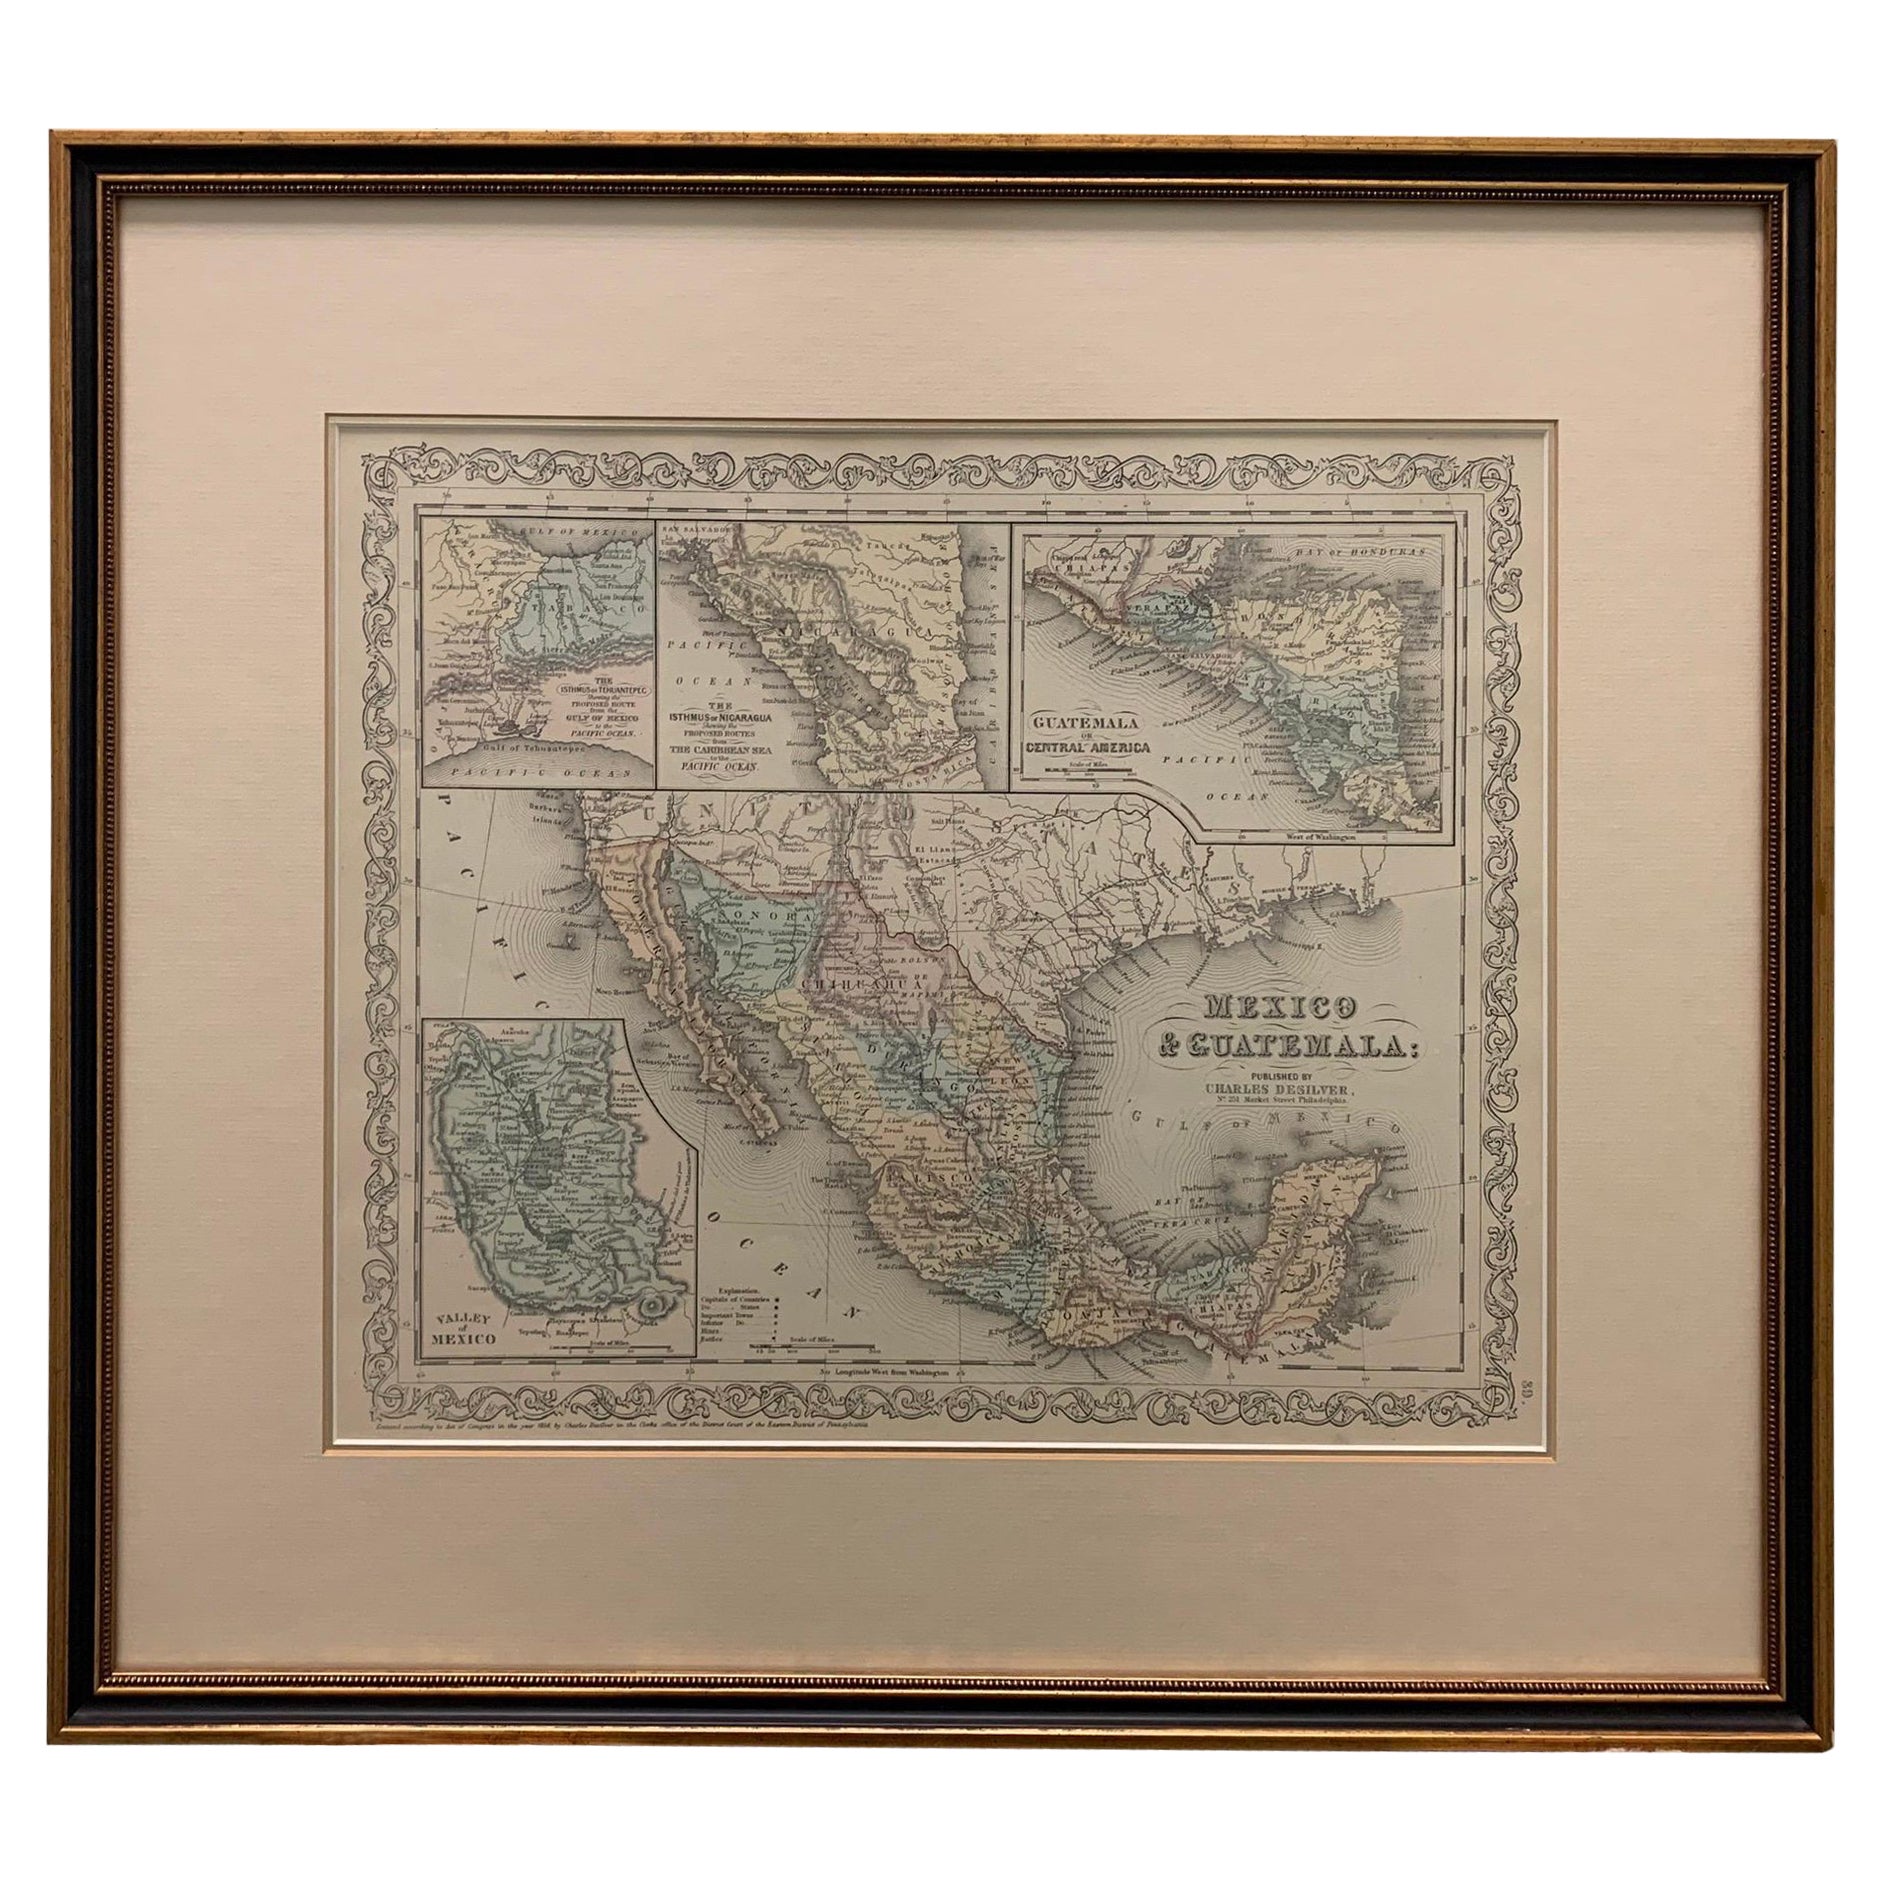 Large 1856 Mexico & Guatemala Framed Map by Charles Desilver